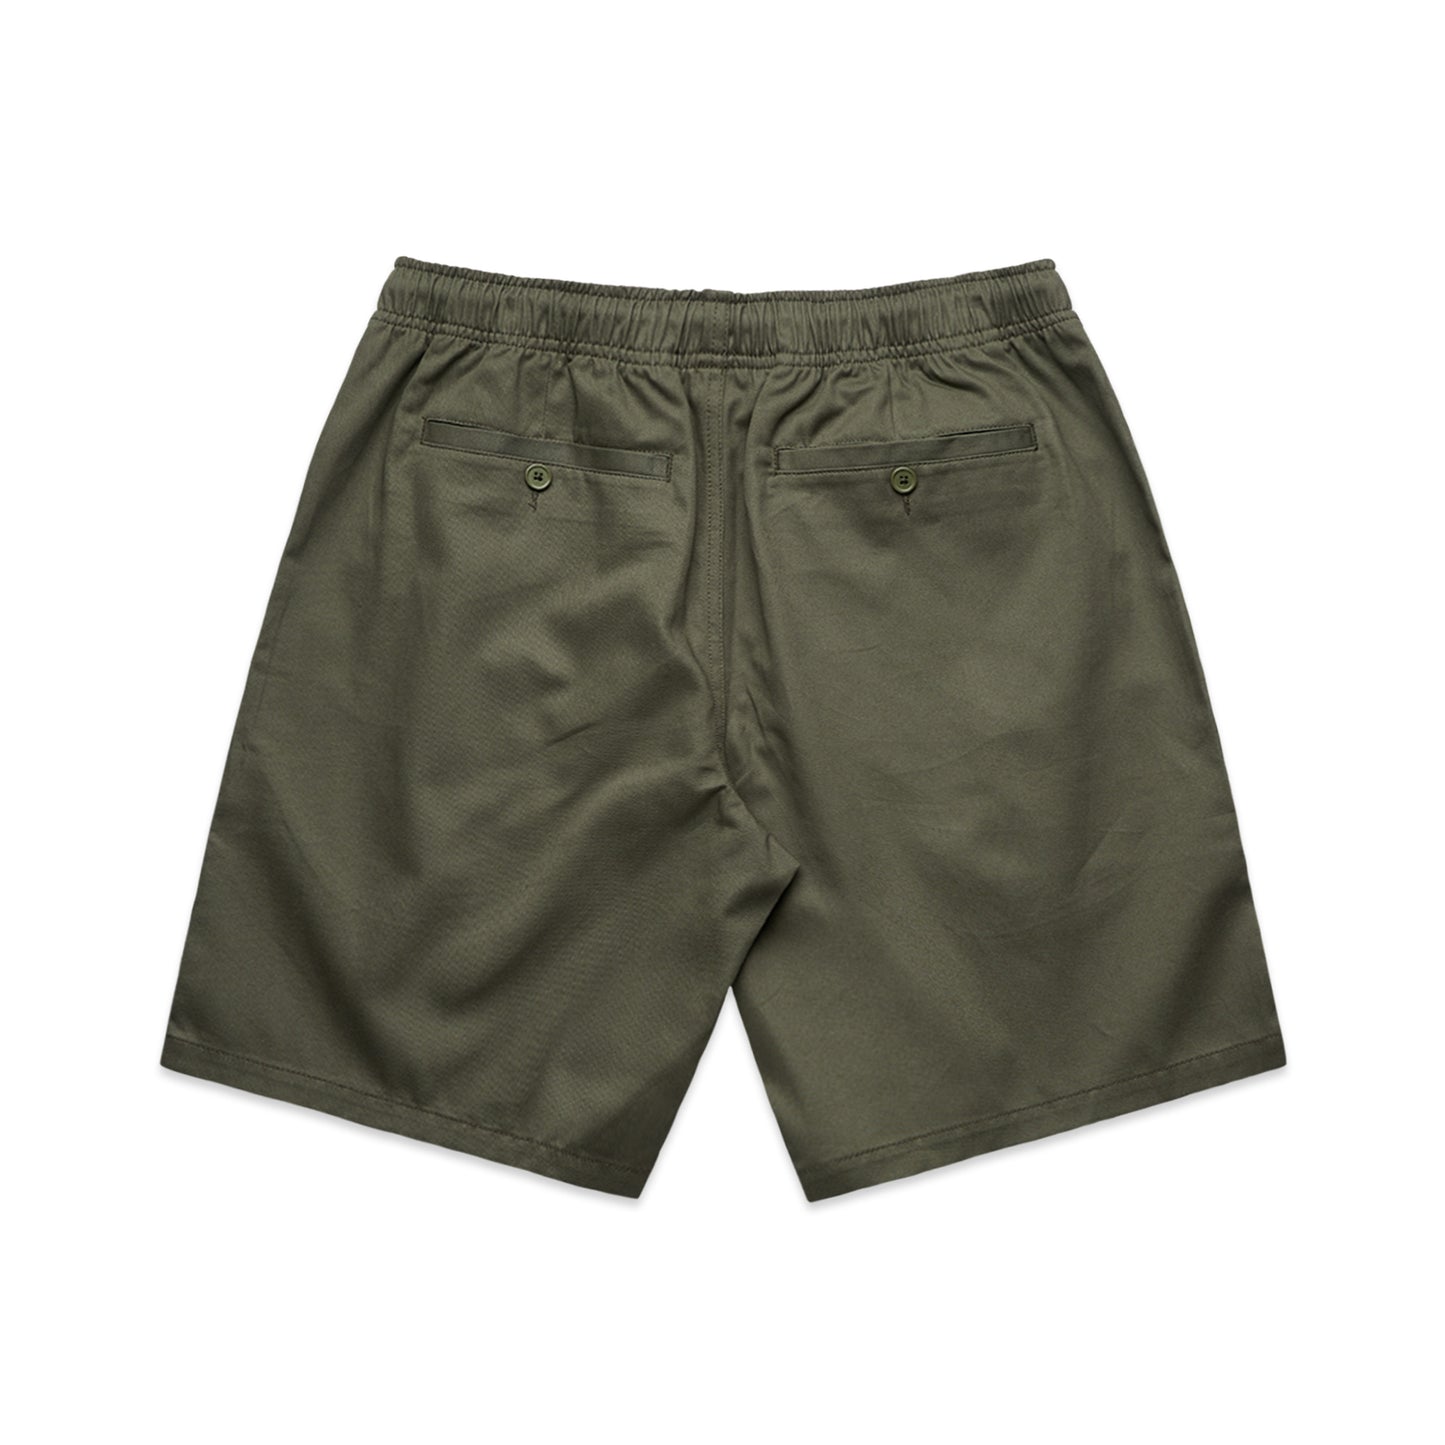 SOULSKY Men's Casual Shorts (Army Green)